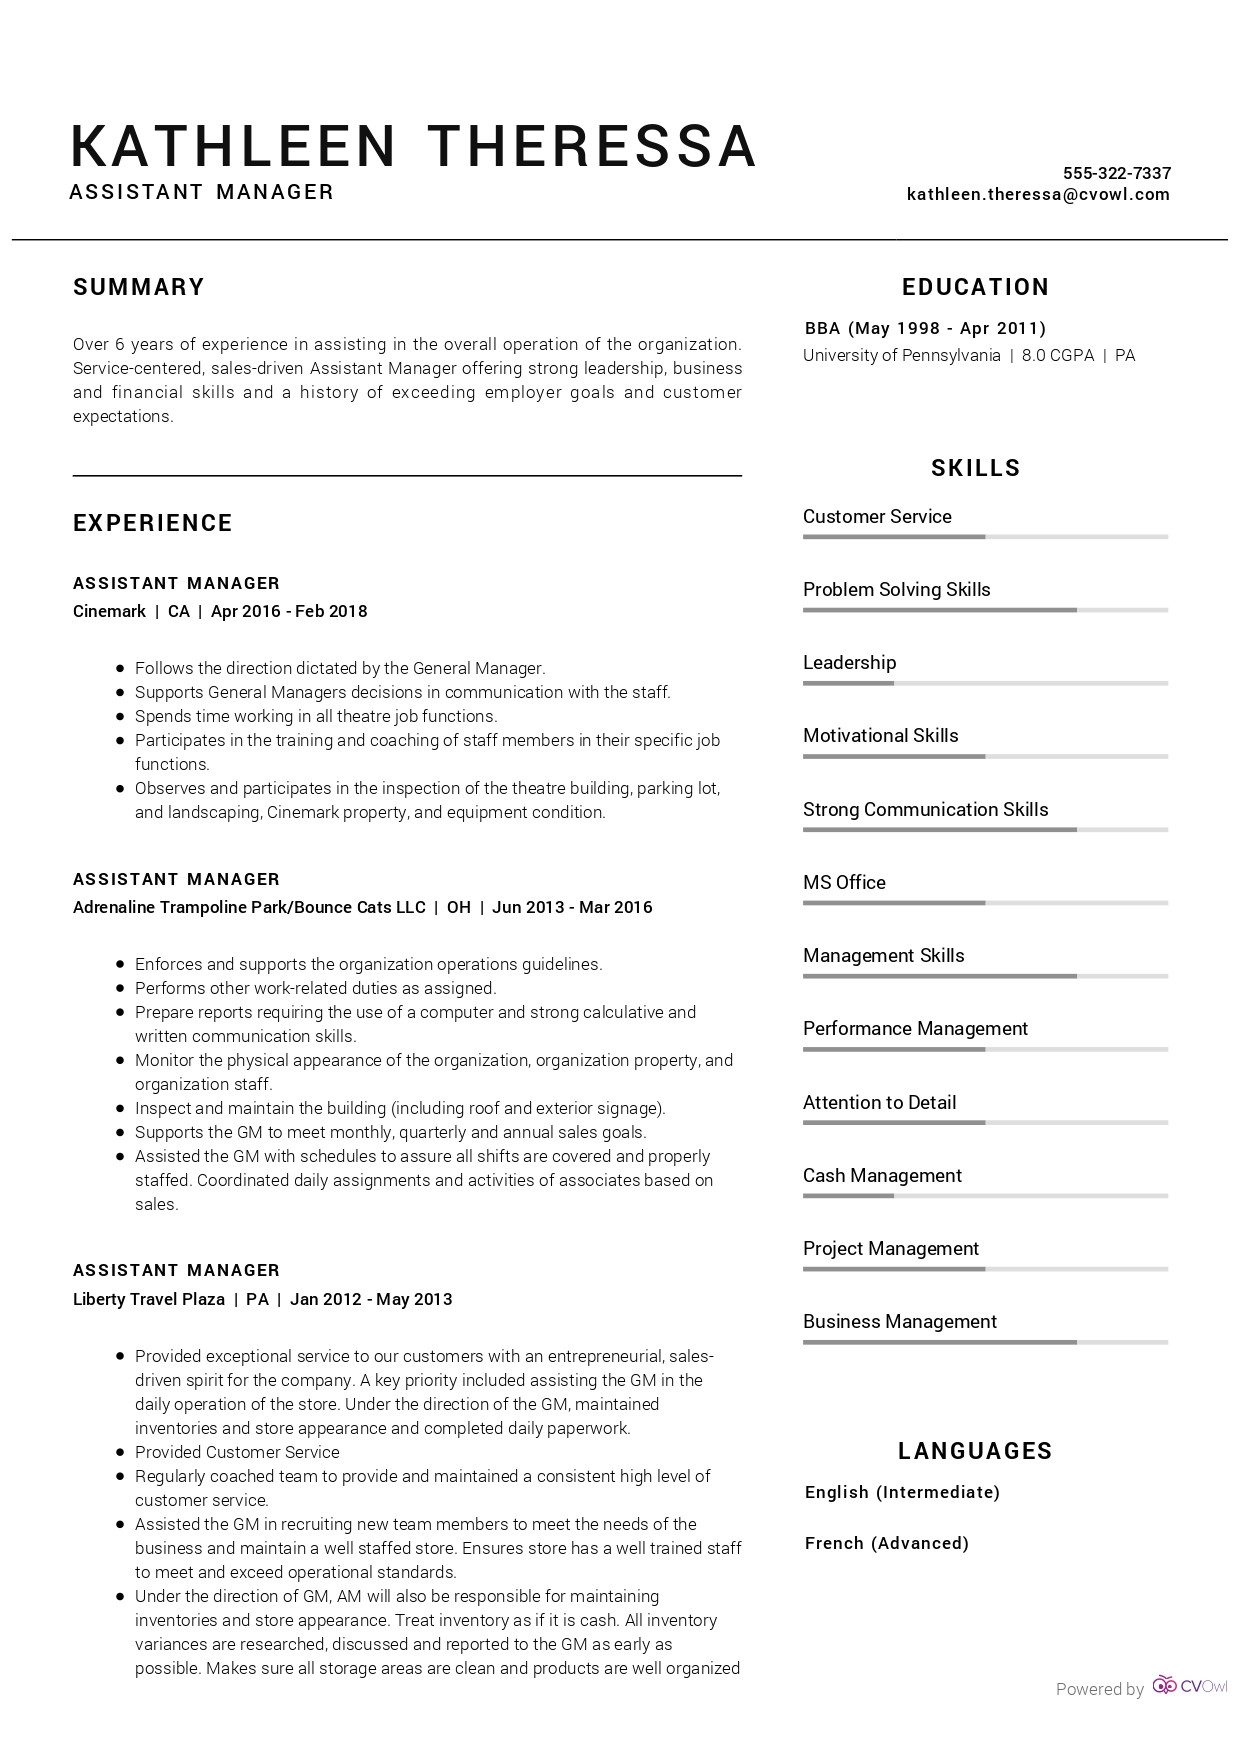 Clothing Store assistant Manager Resume Sample assistant Manager Resume Sample Cv Owl